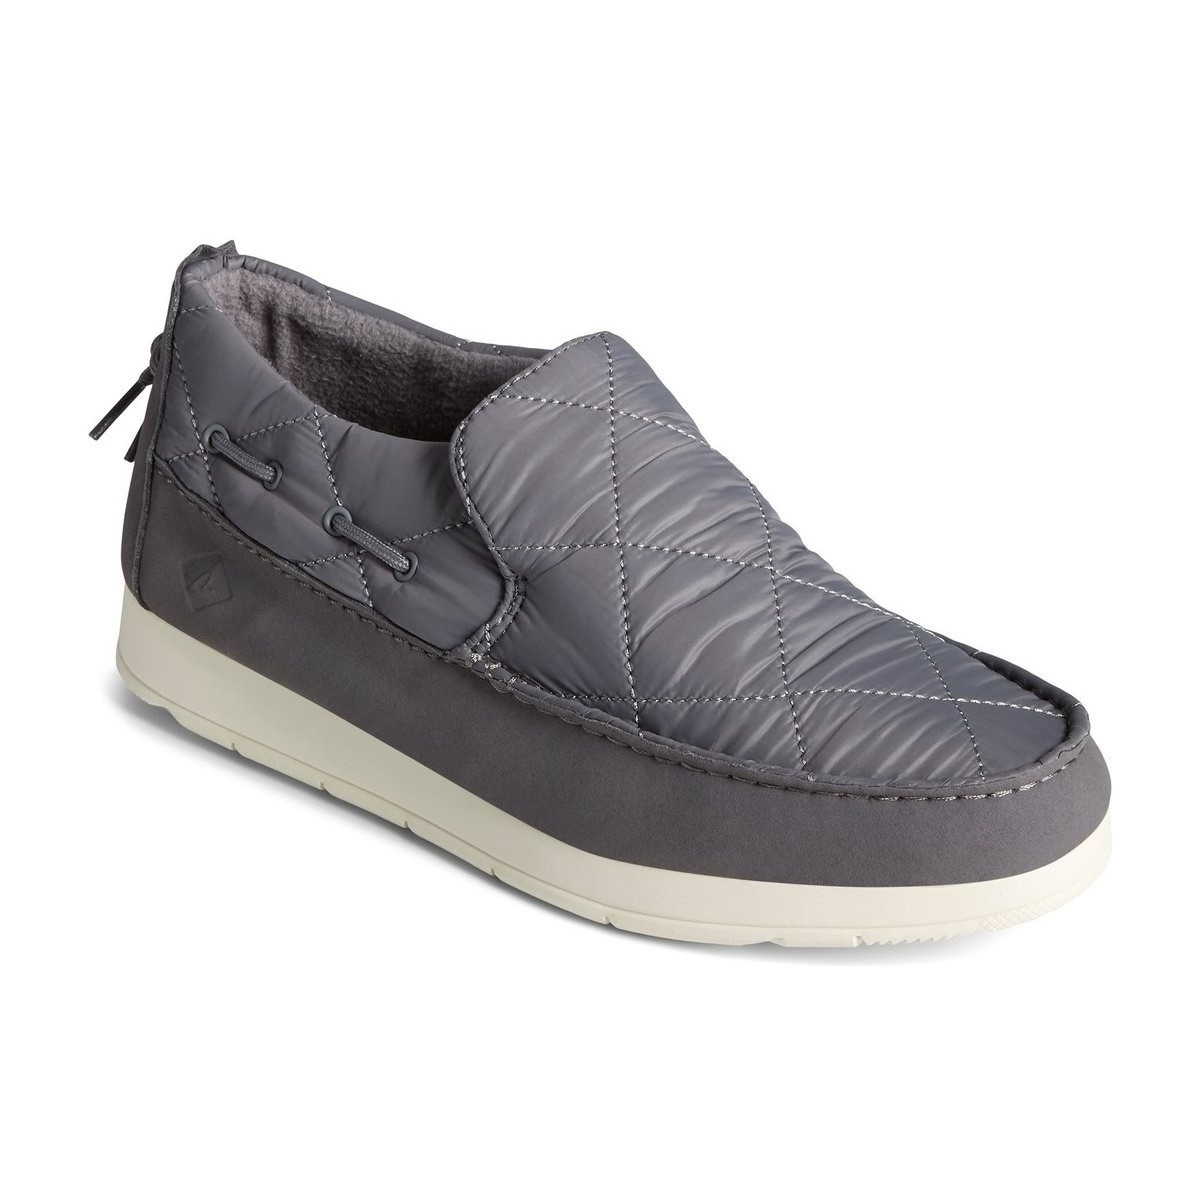 Chaussures Mocassins Sperry Top-Sider Moc Sider Gris